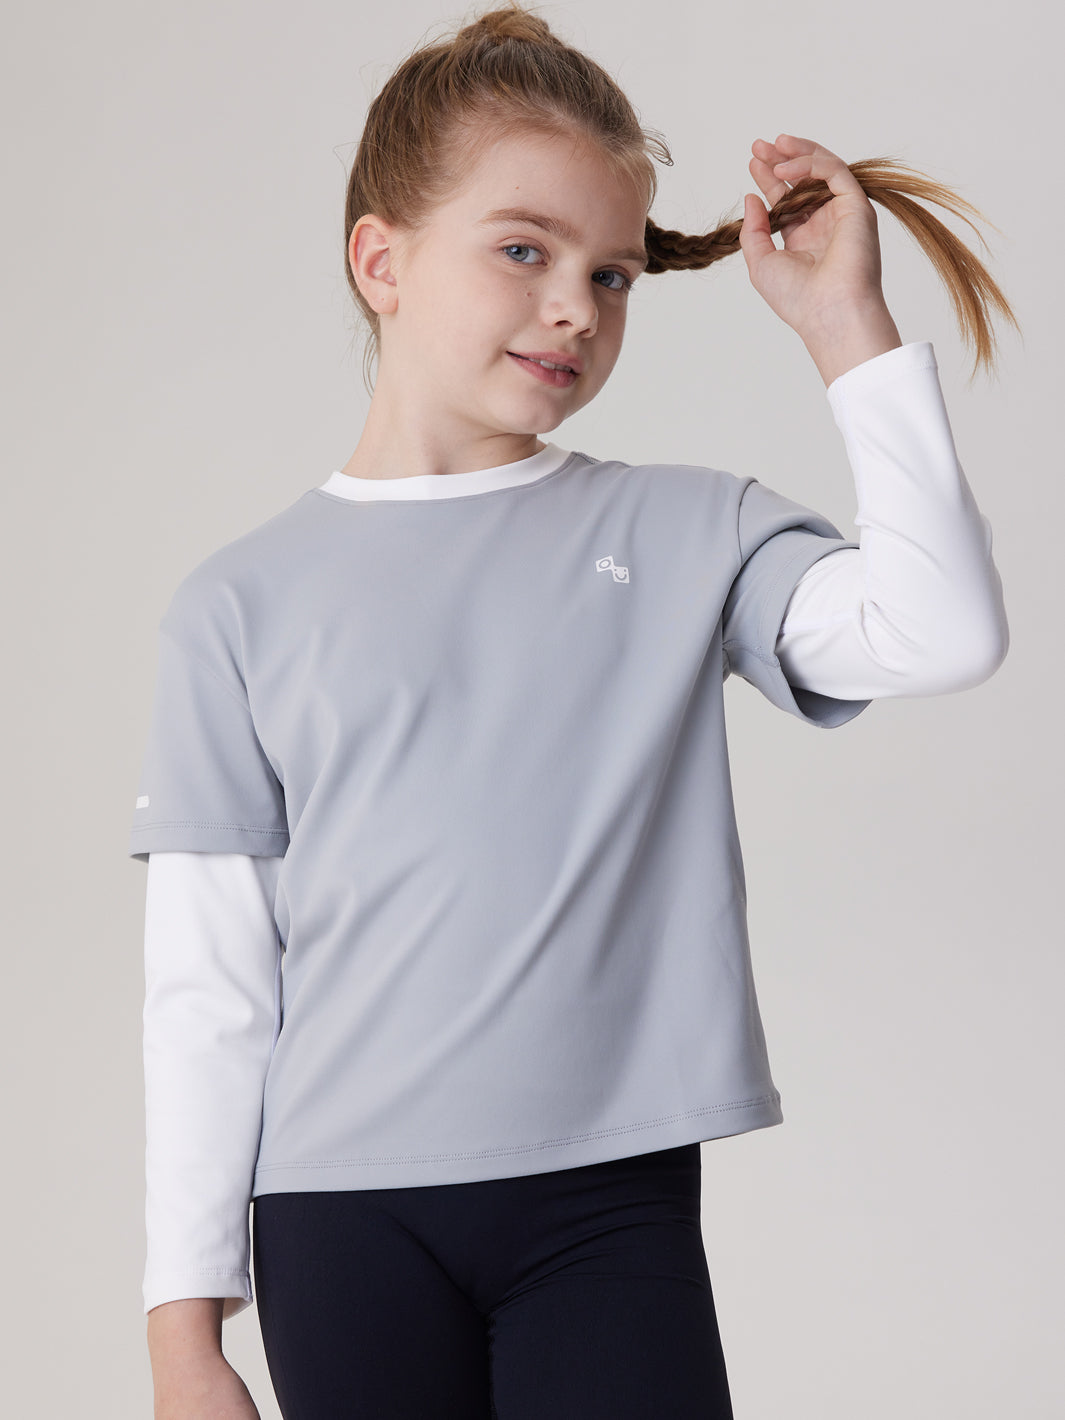 Cotton  2 in 1 Long Sleeve Shirt